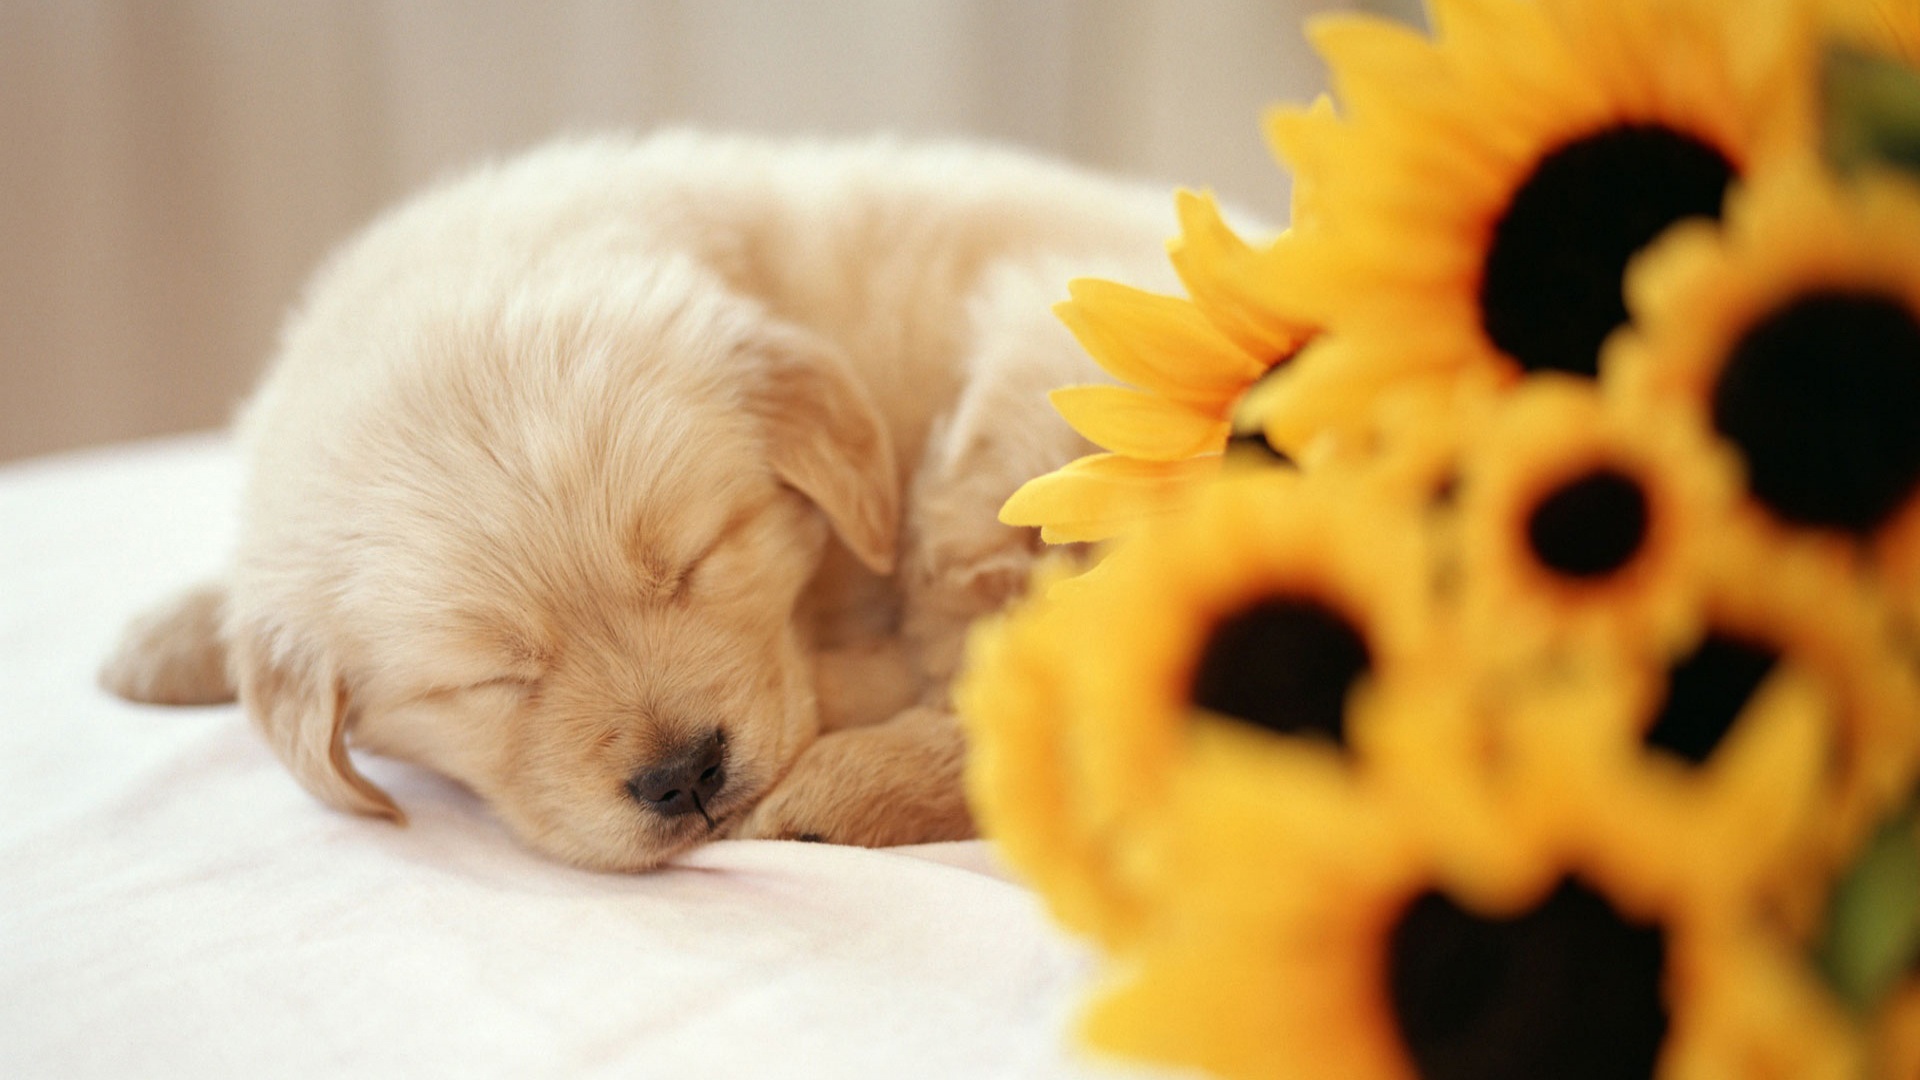 Sleeping Puppy Wallpapers